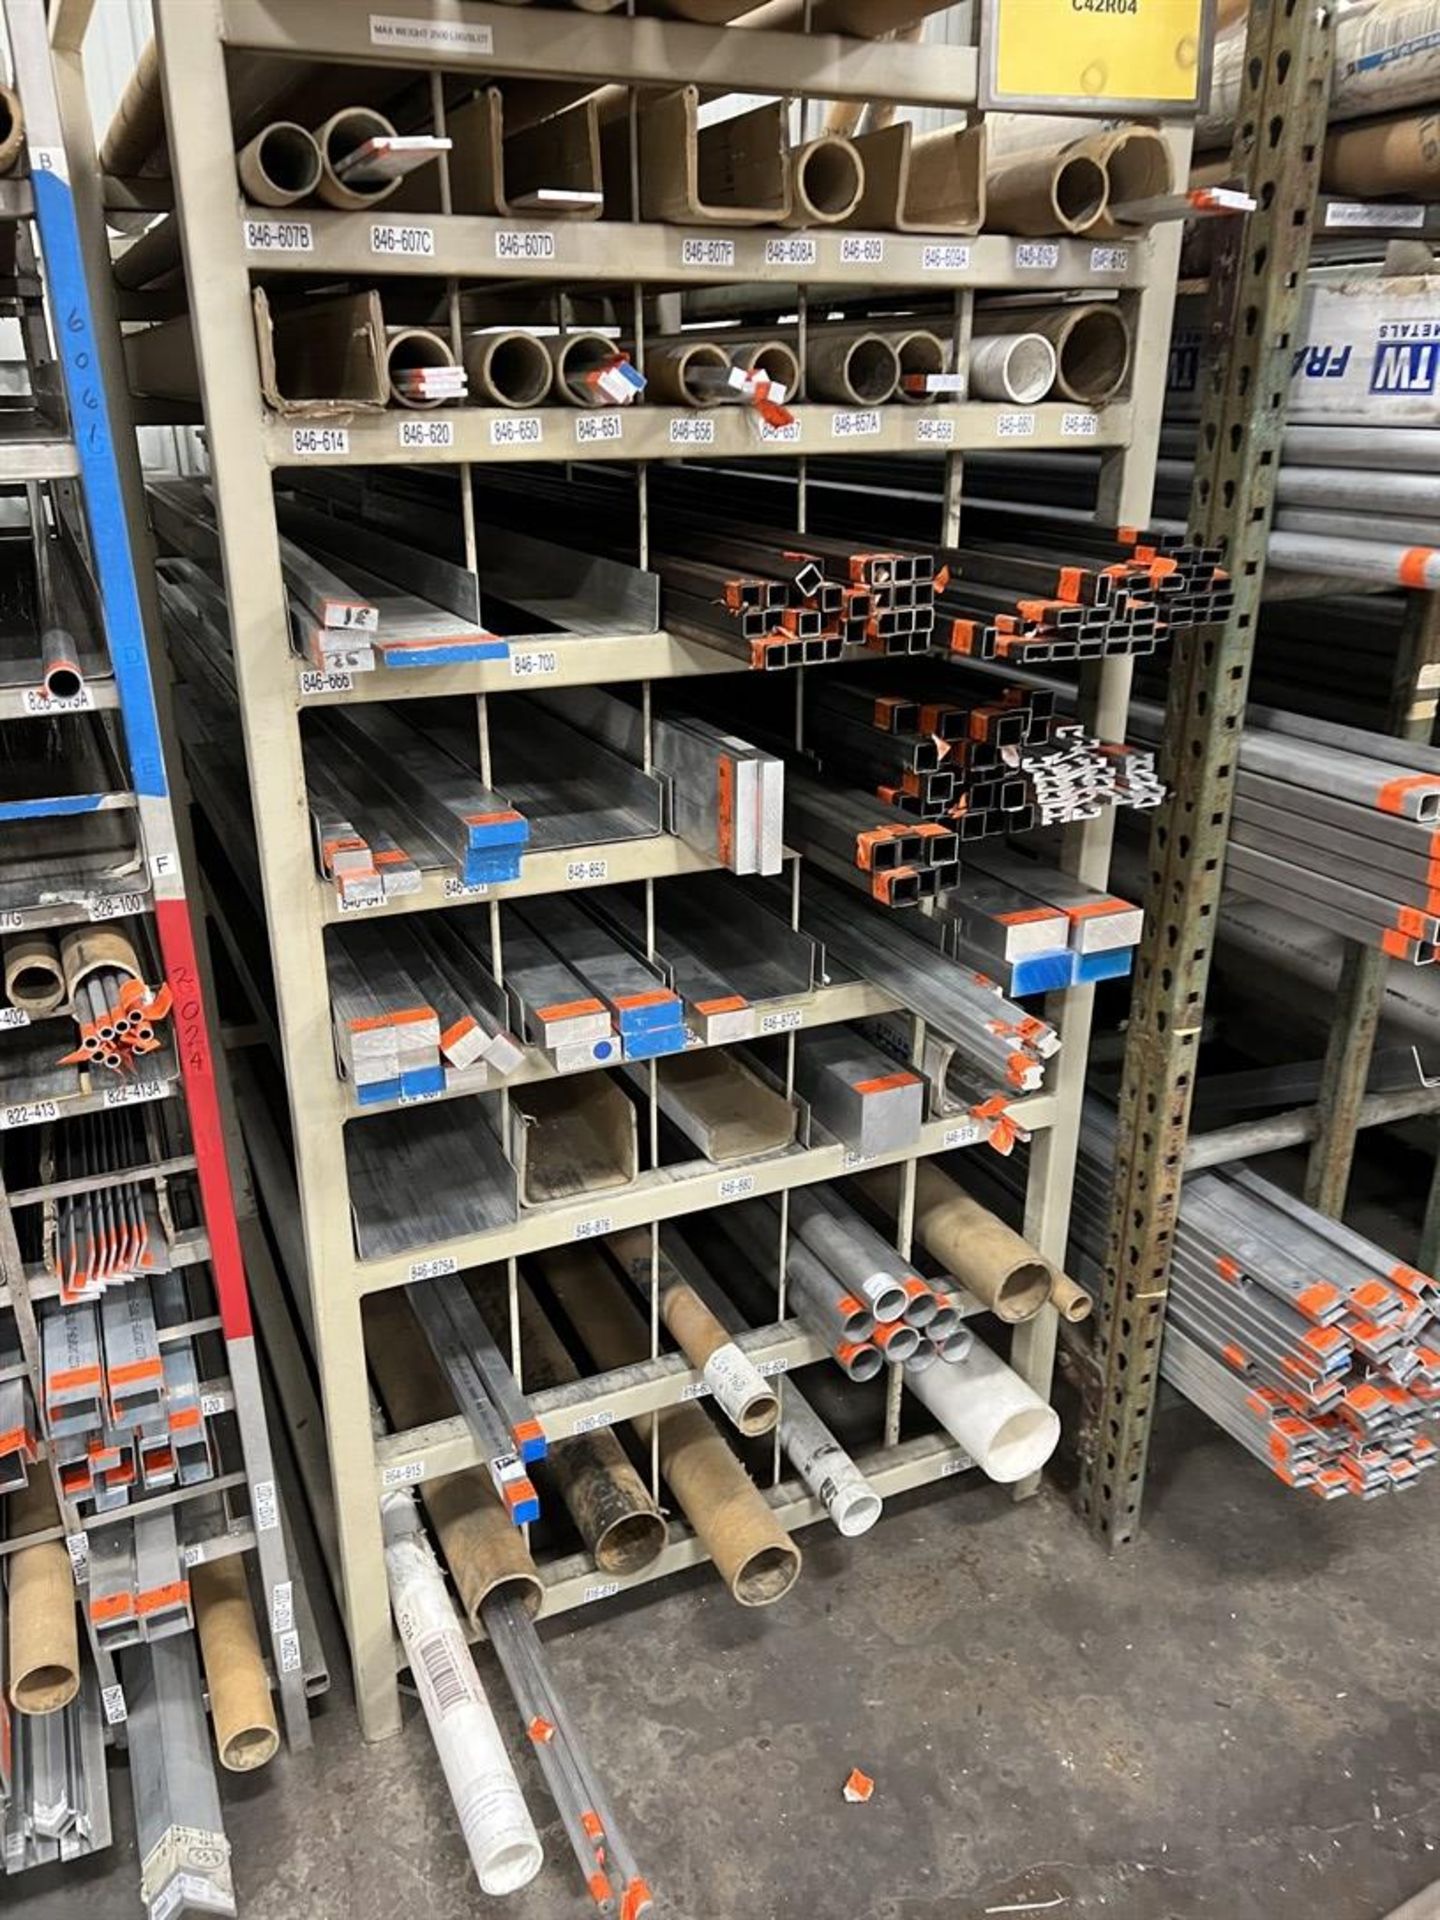 Lot of Stock Racks w/ Assorted Stock Including Aluminum and Steel Flat stock, Round Tubing, and - Image 4 of 7